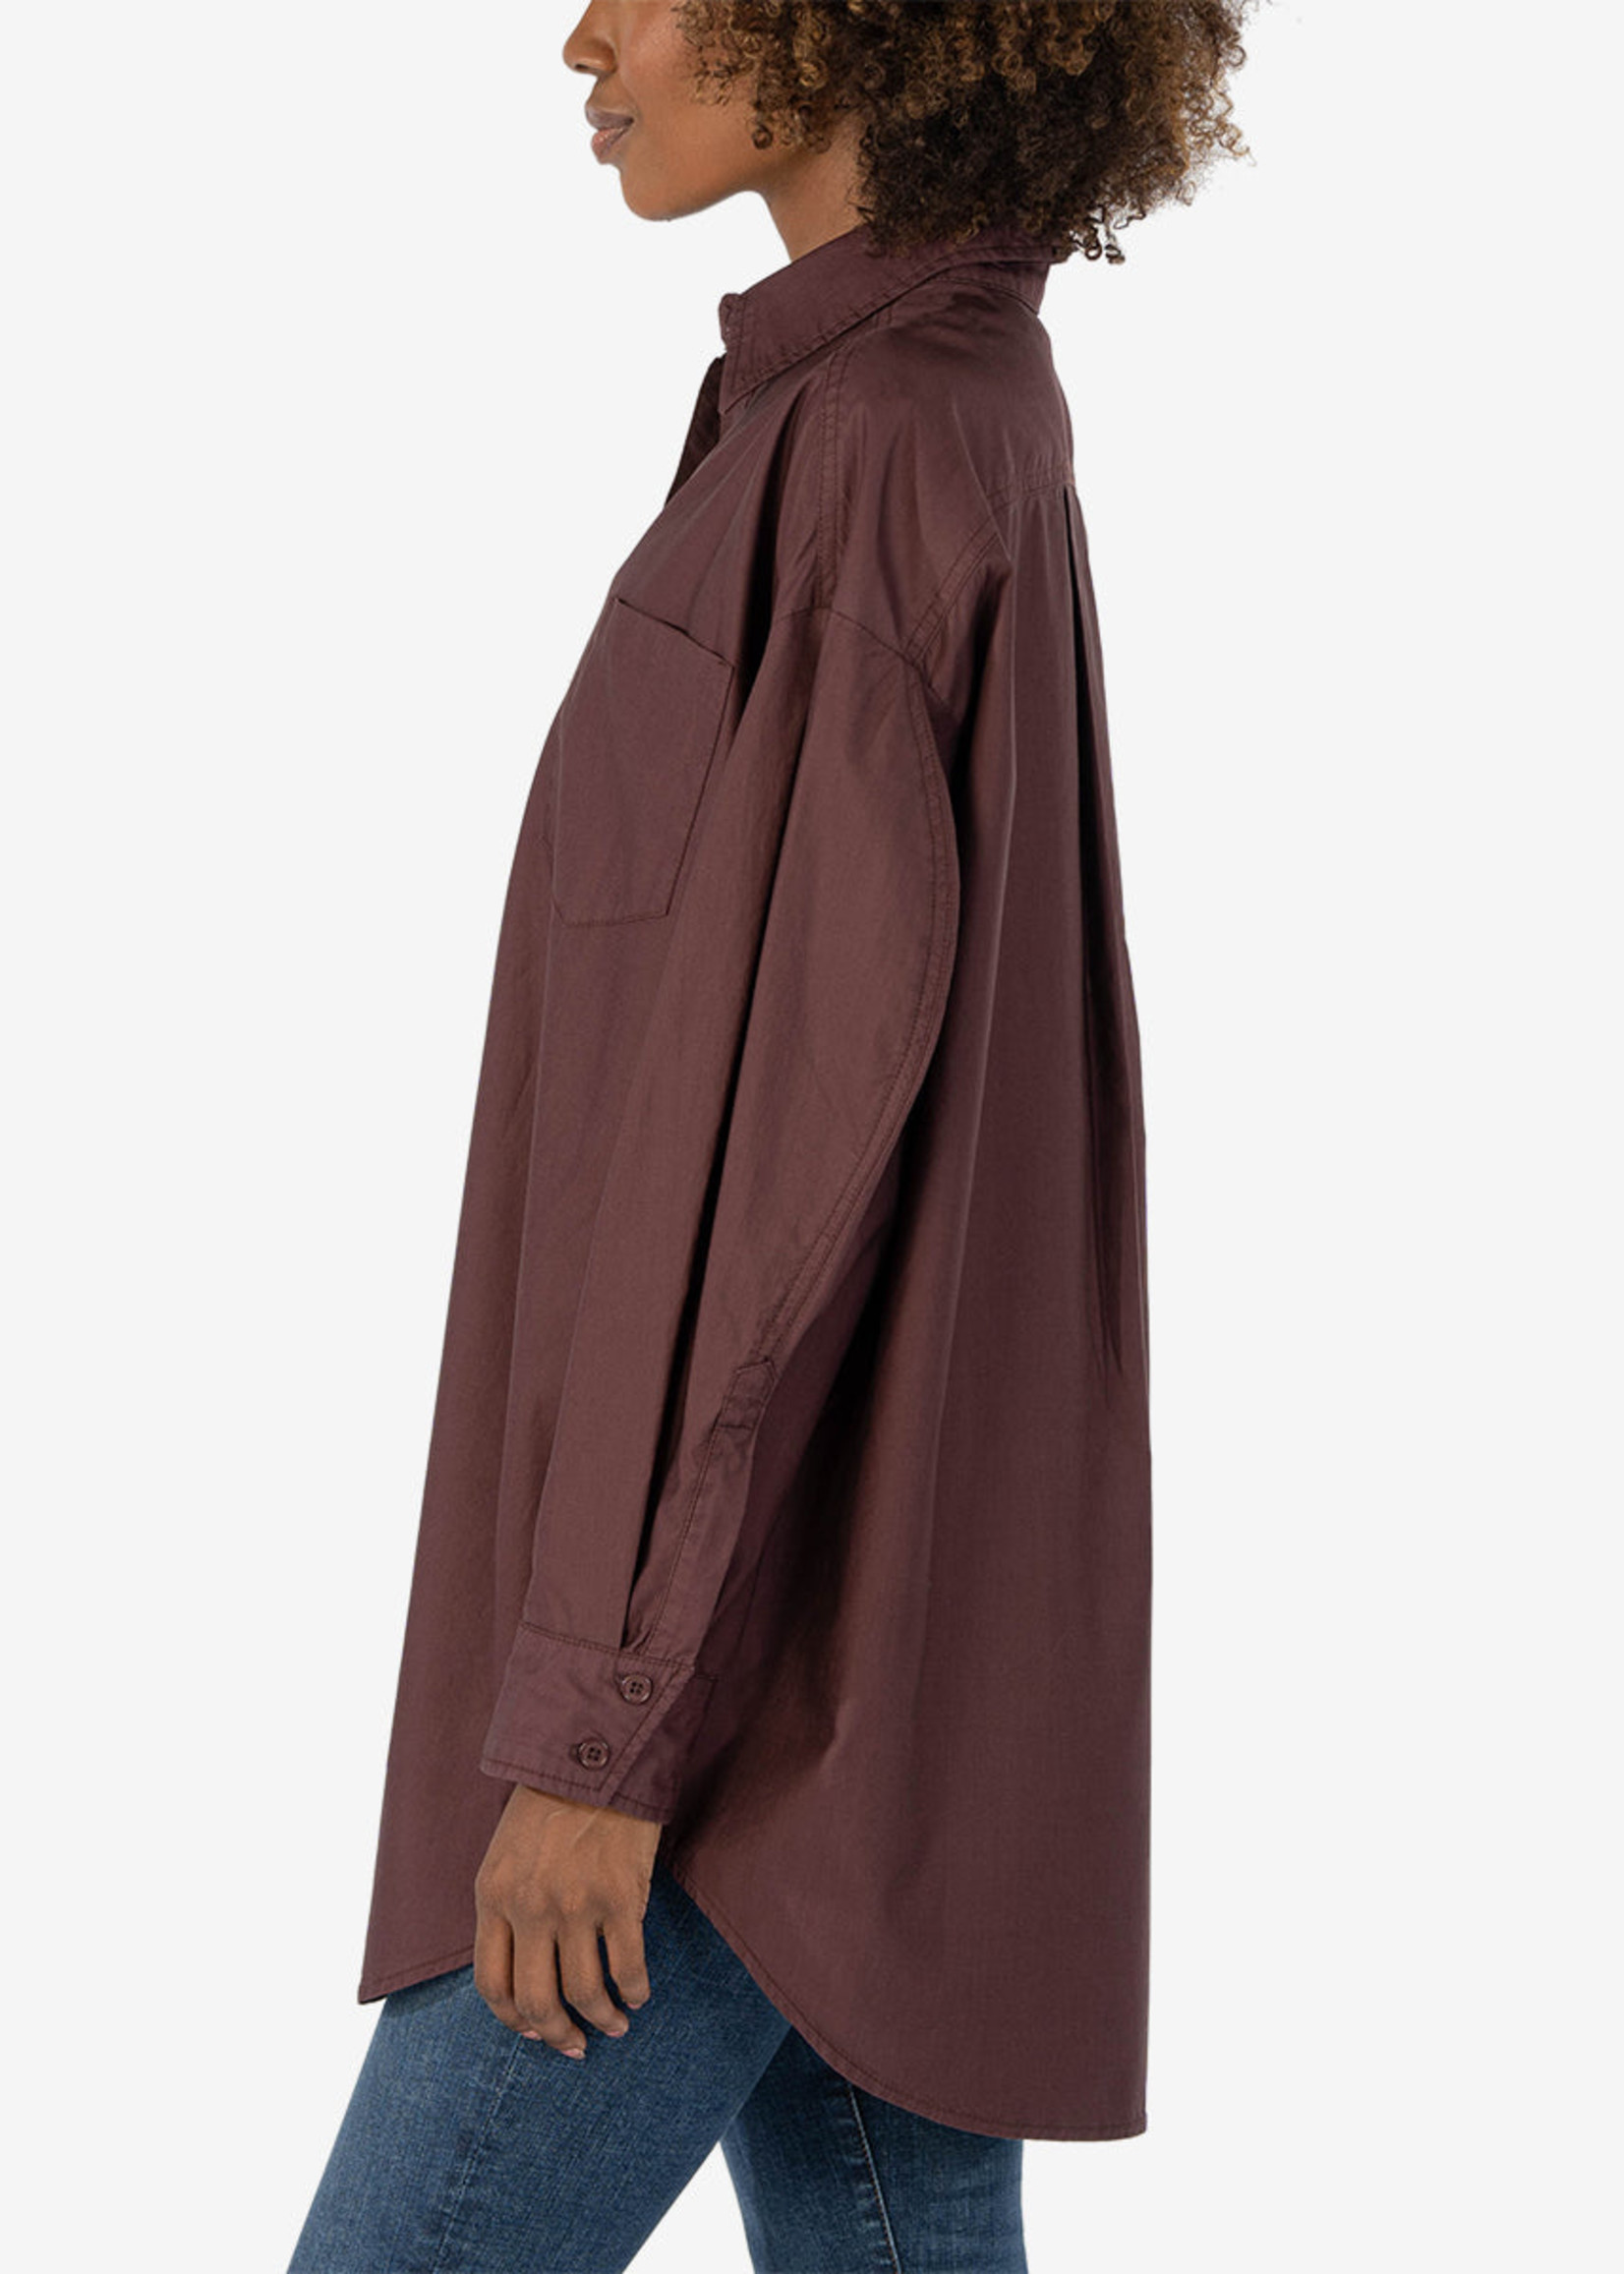 KUT from the Kloth Tyra Cotton Oversized Button Down Shirt